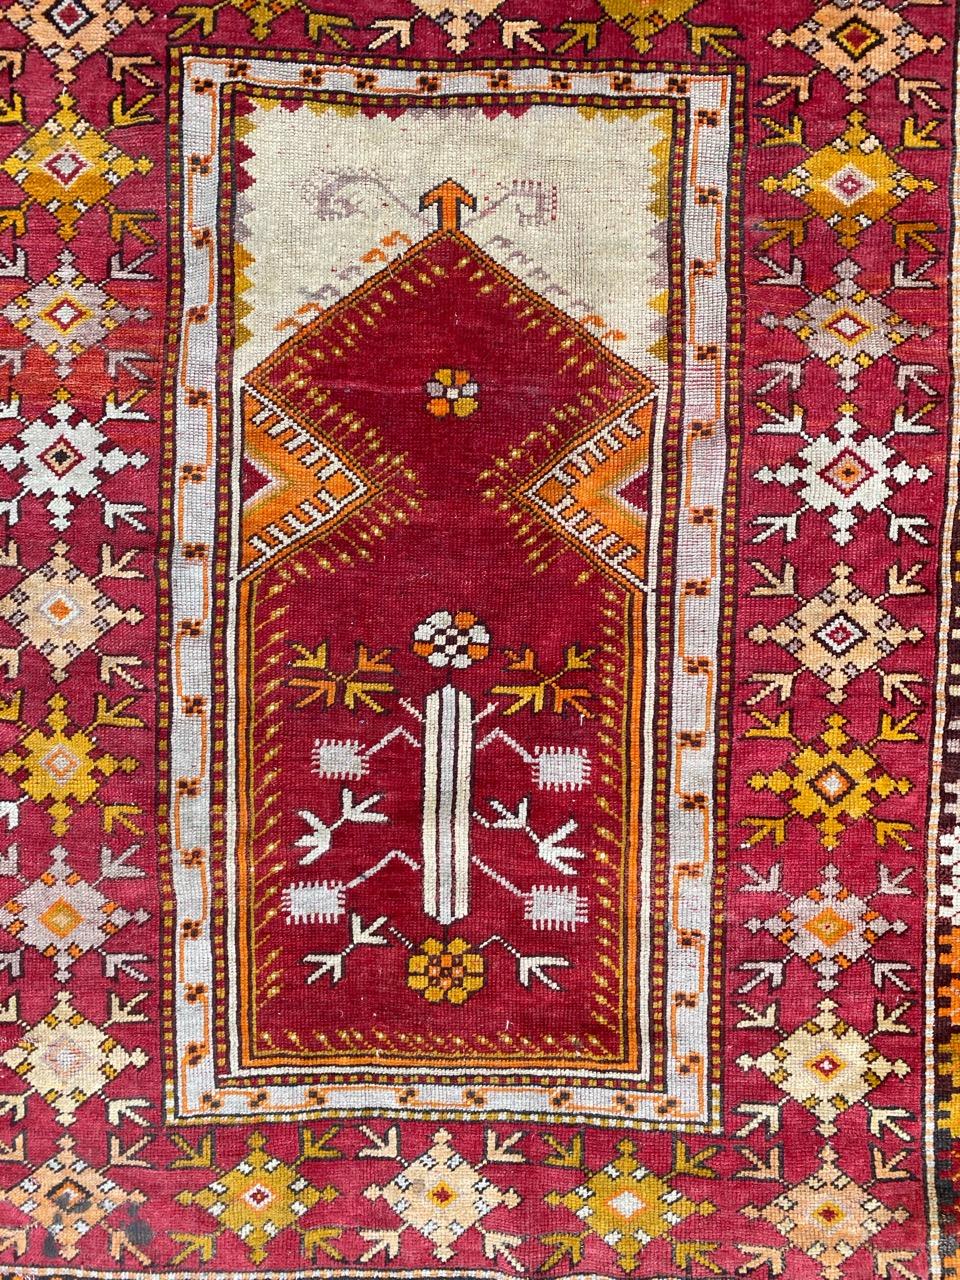 Beautiful early 20th century Turkish prayer rug with a geometrical design with Mihrab and nice colors, entirely hand knotted with wool velvet on wool foundation.

✨✨✨
